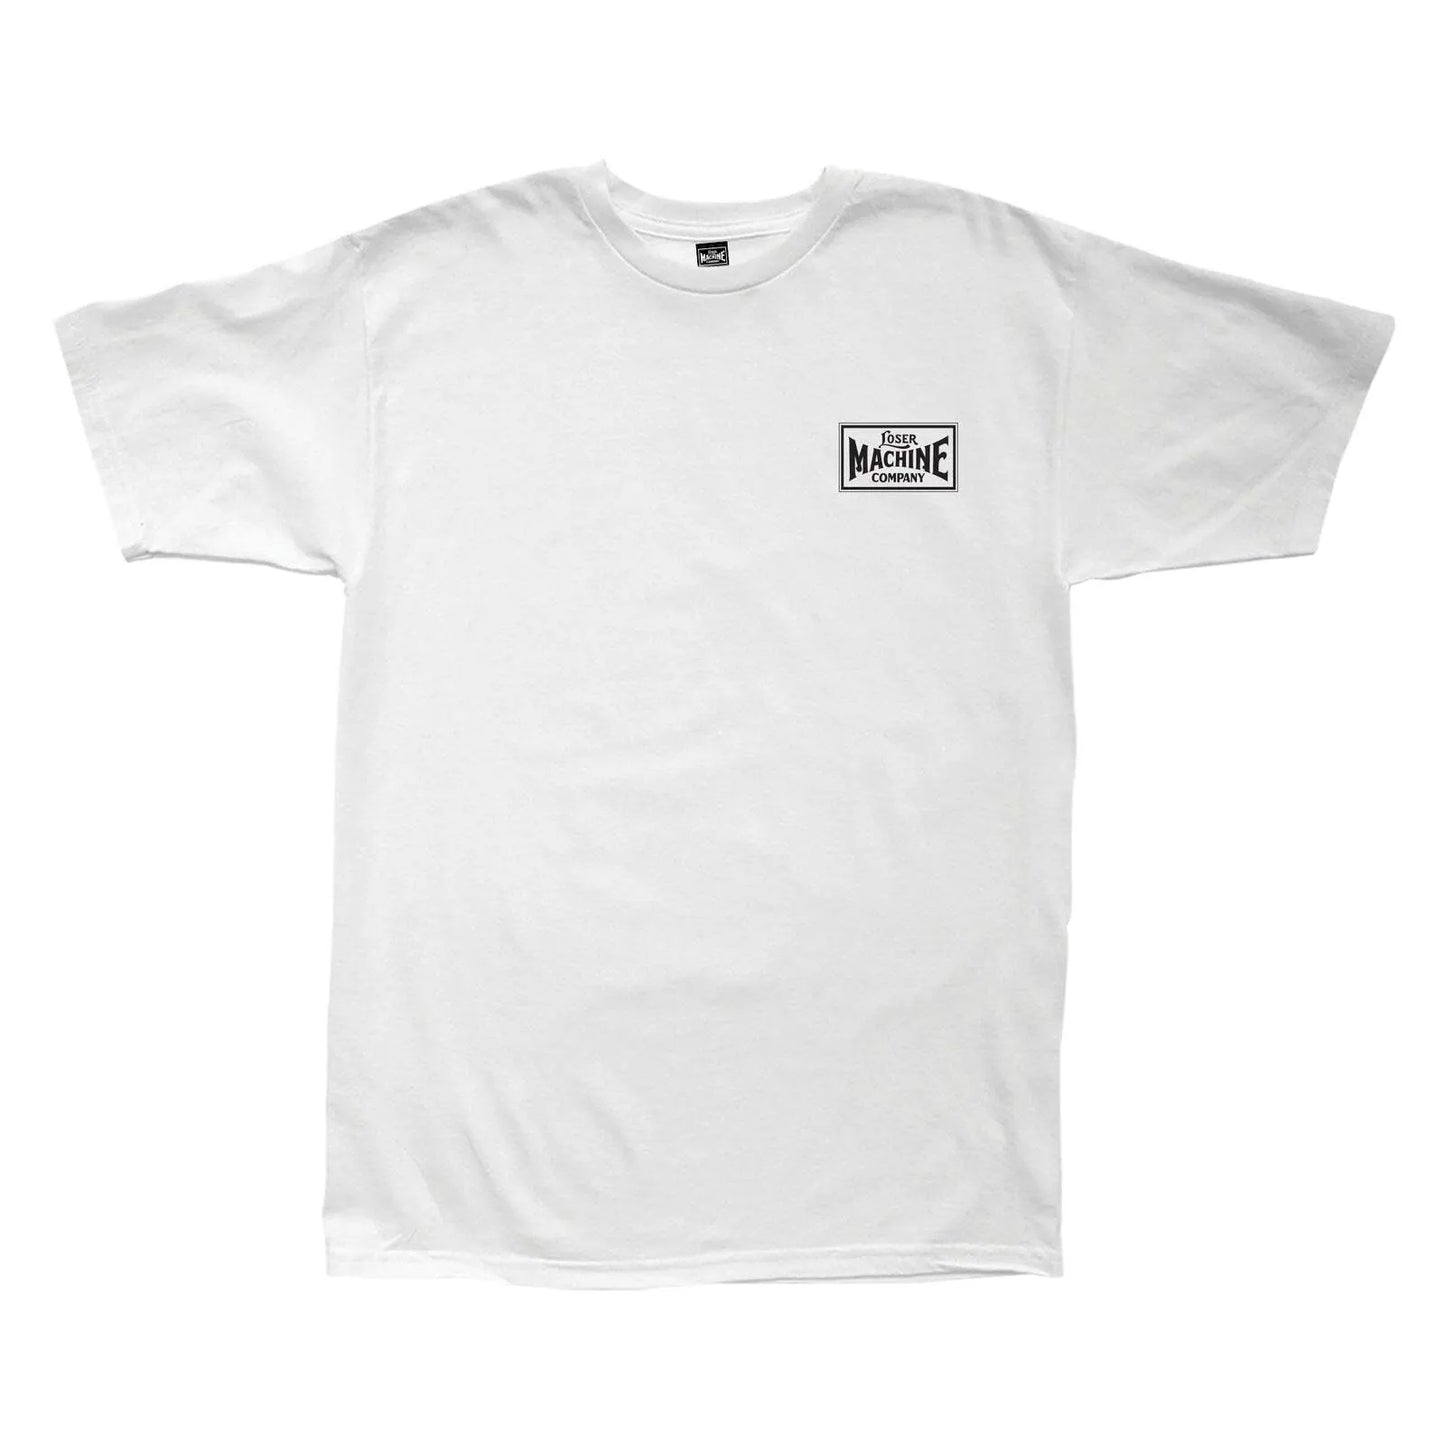 Loser Machine Co - Payback Stock Tee